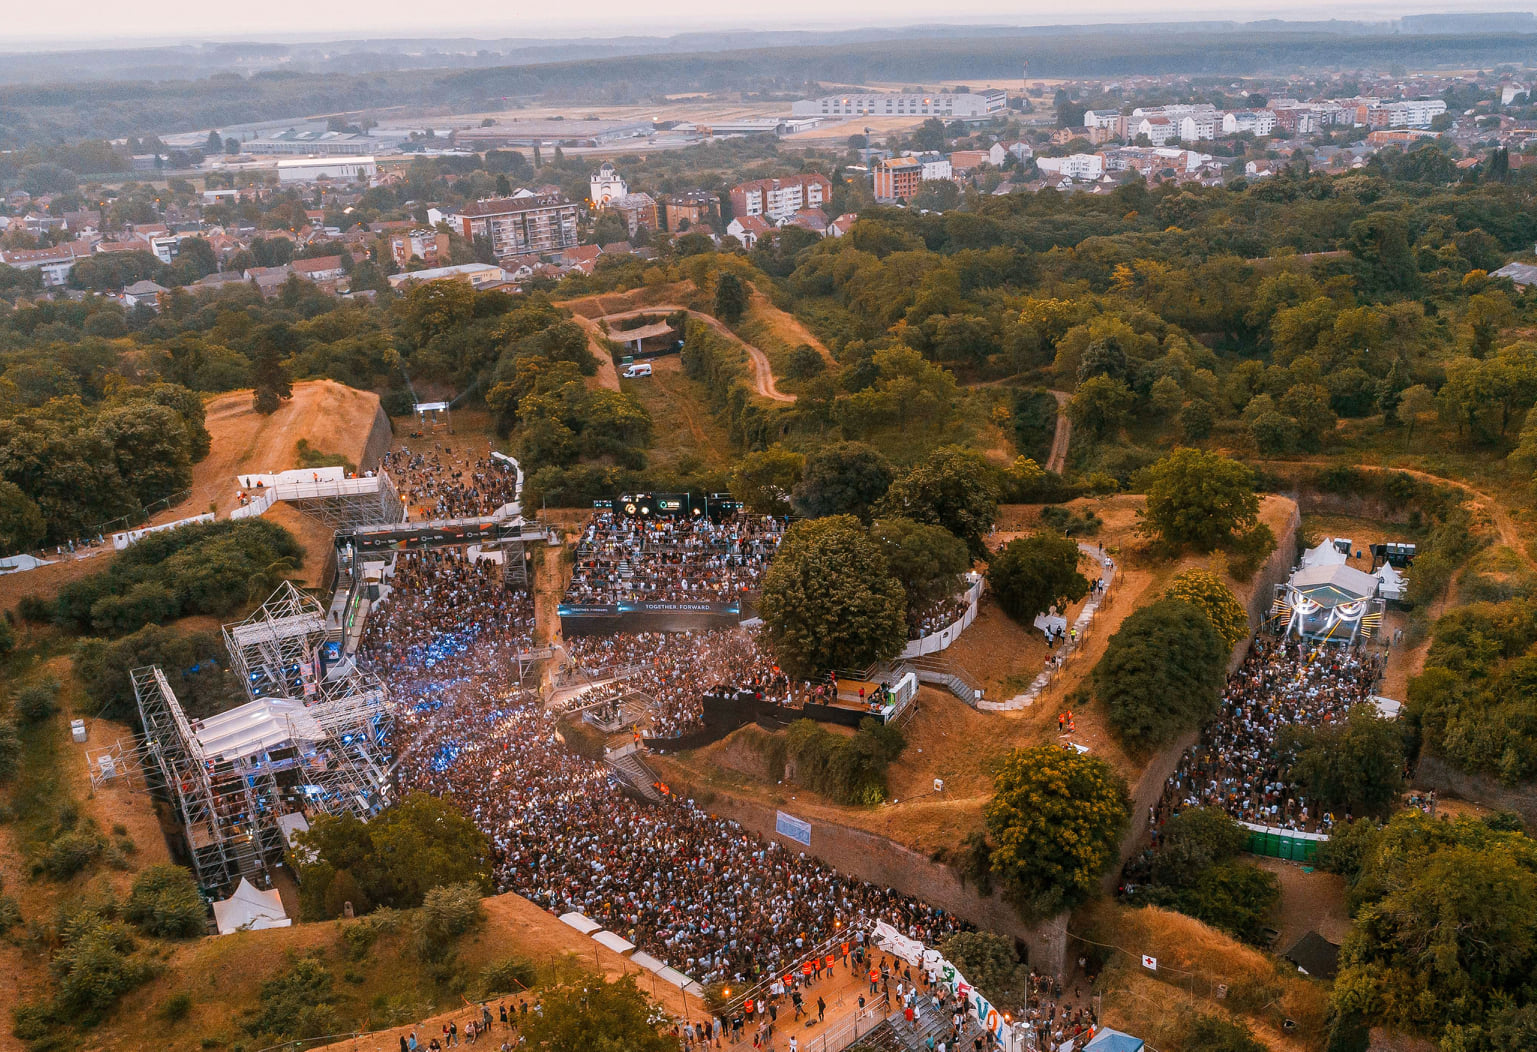 Serbia’s Exit Festival Draws 180,000 Guests The Largest Music Event